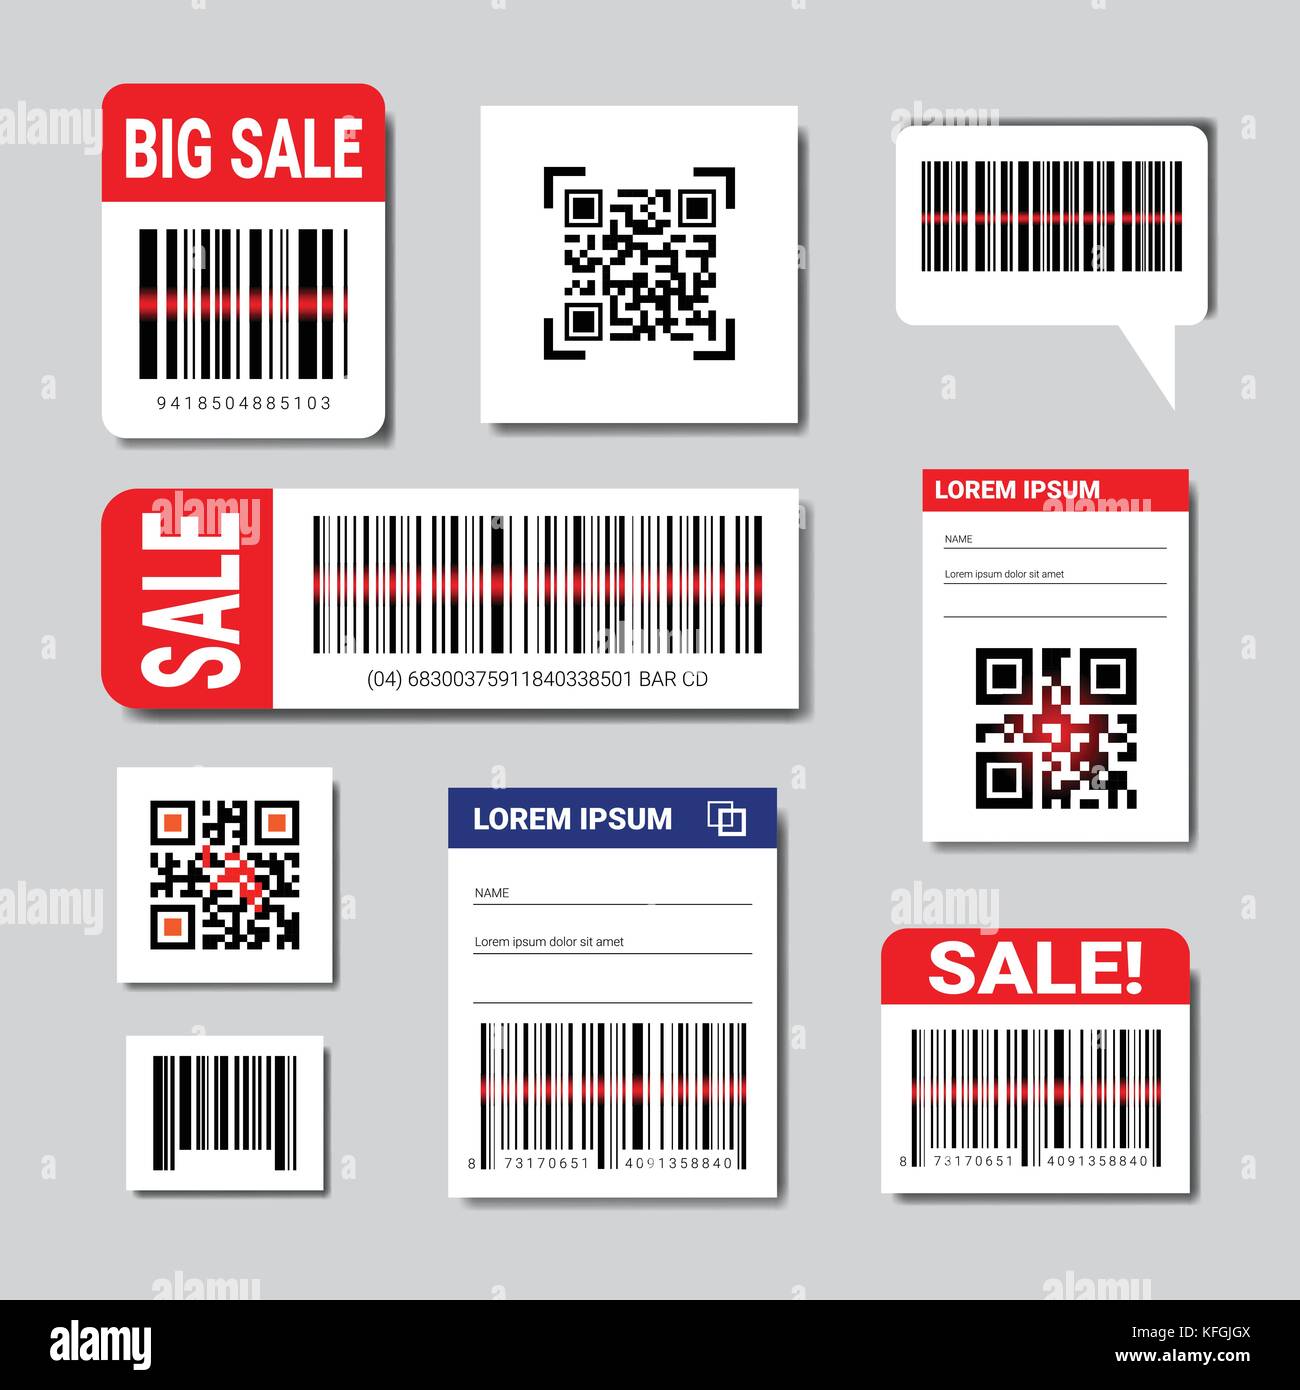 Set Of Bar And Qr Codes Stickers With Sale Text And Copy Space Scanning Icons Collection Stock Vector